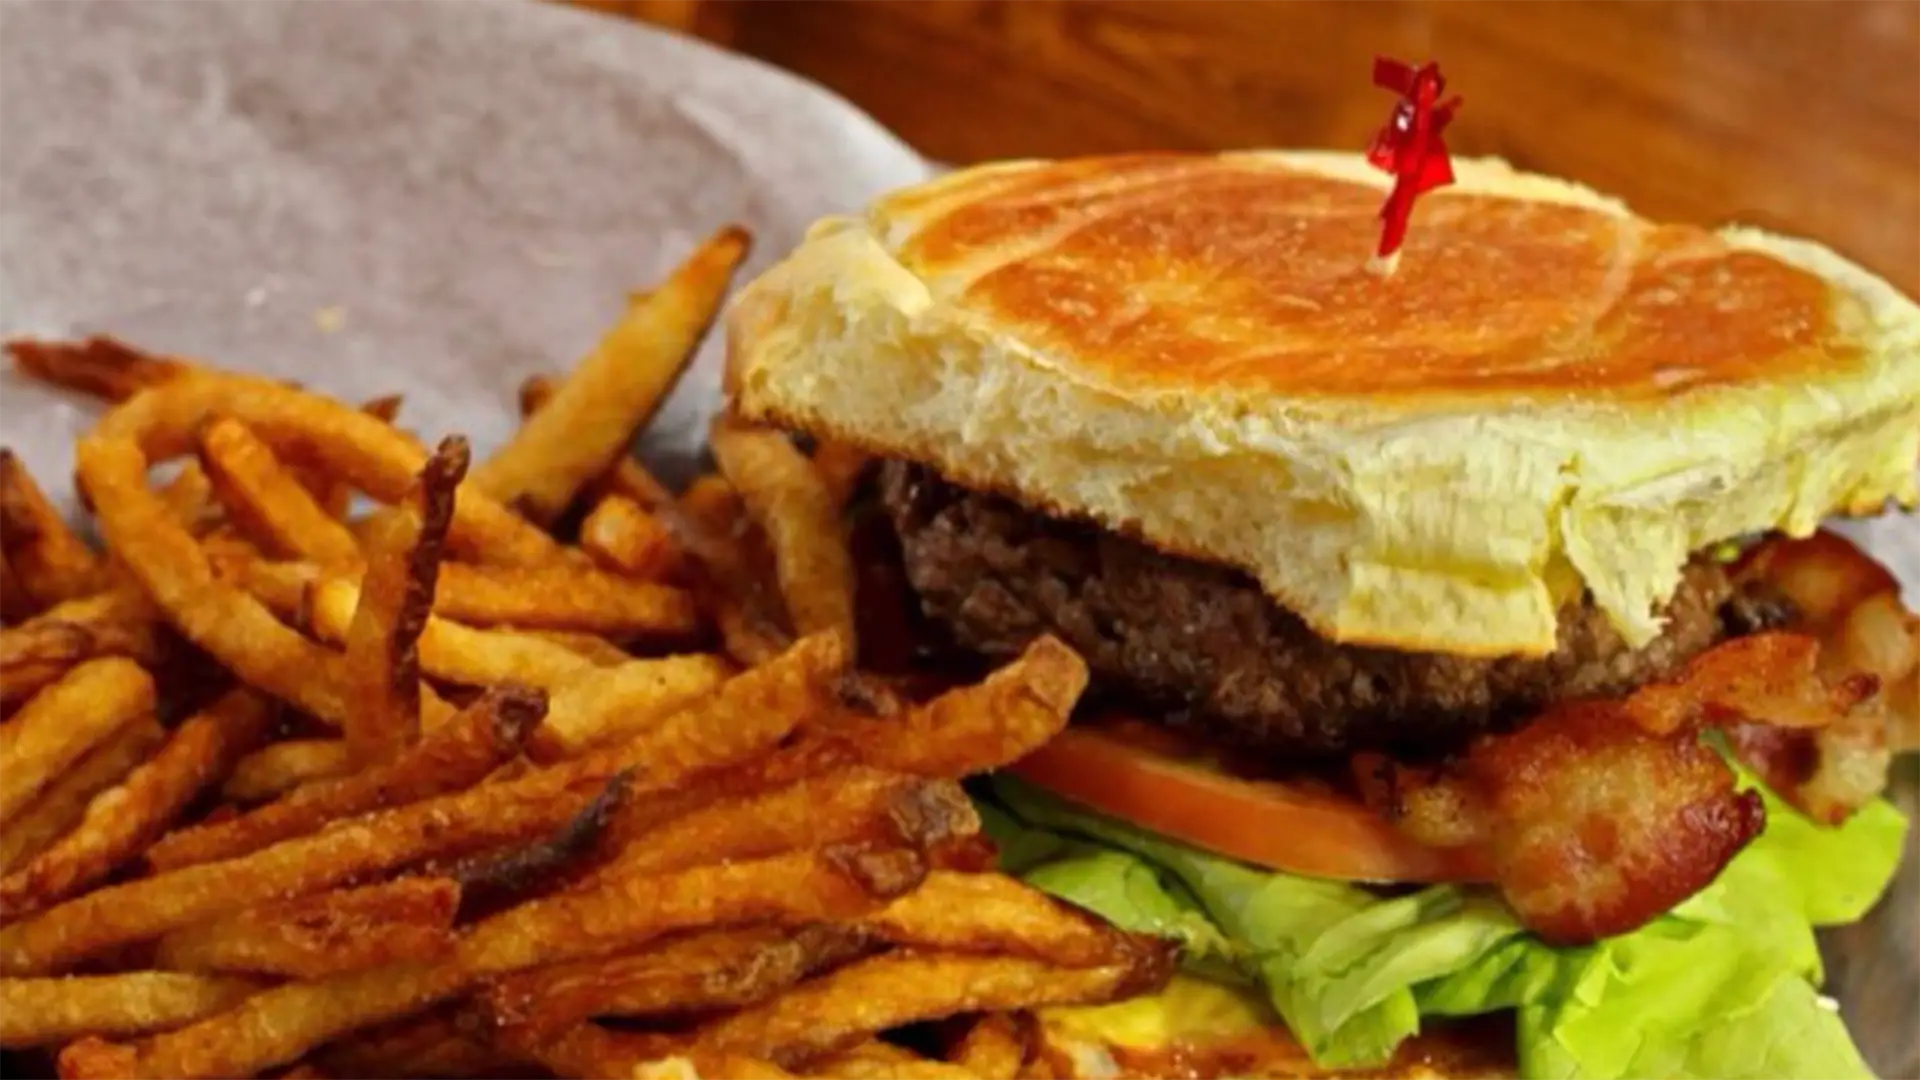 A juicy burger with lettuce, tomato, bacon, and a unique crisscrossed bun is topped with a red toothpick. Known as the best burger on the Big Island, it comes with a generous serving of crispy, golden French fries. The meal is served on a rustic grey plate.